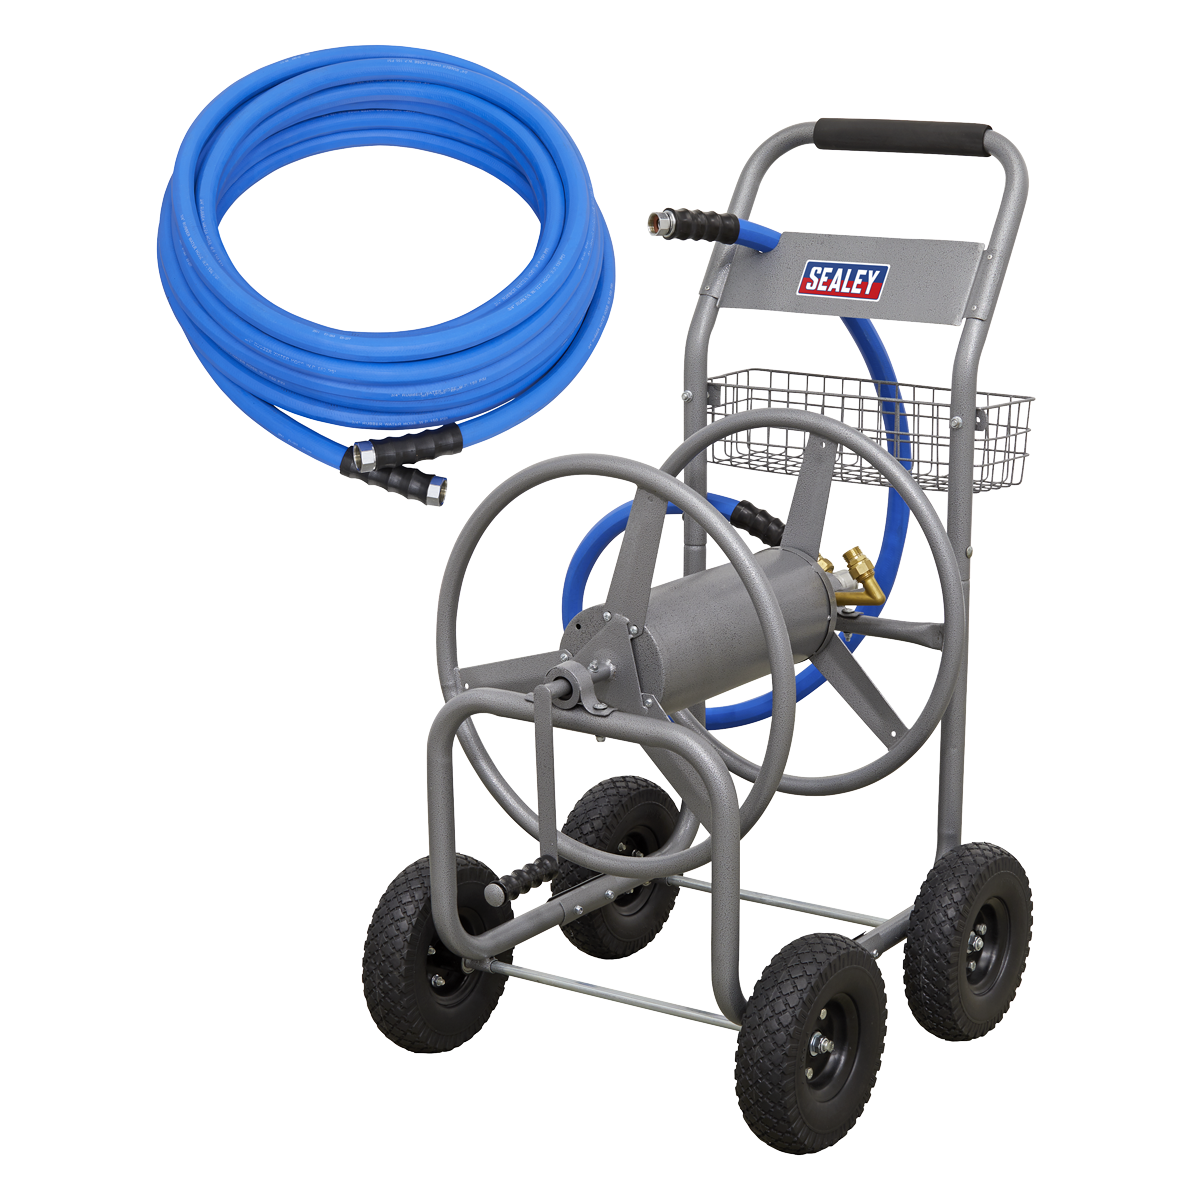 Sealey HRKIT5 Heavy-Duty Hose Reel Cart with 5m Heavy-Duty ø19mm Hot & Cold  Rubber Water Hose from Lawson HIS